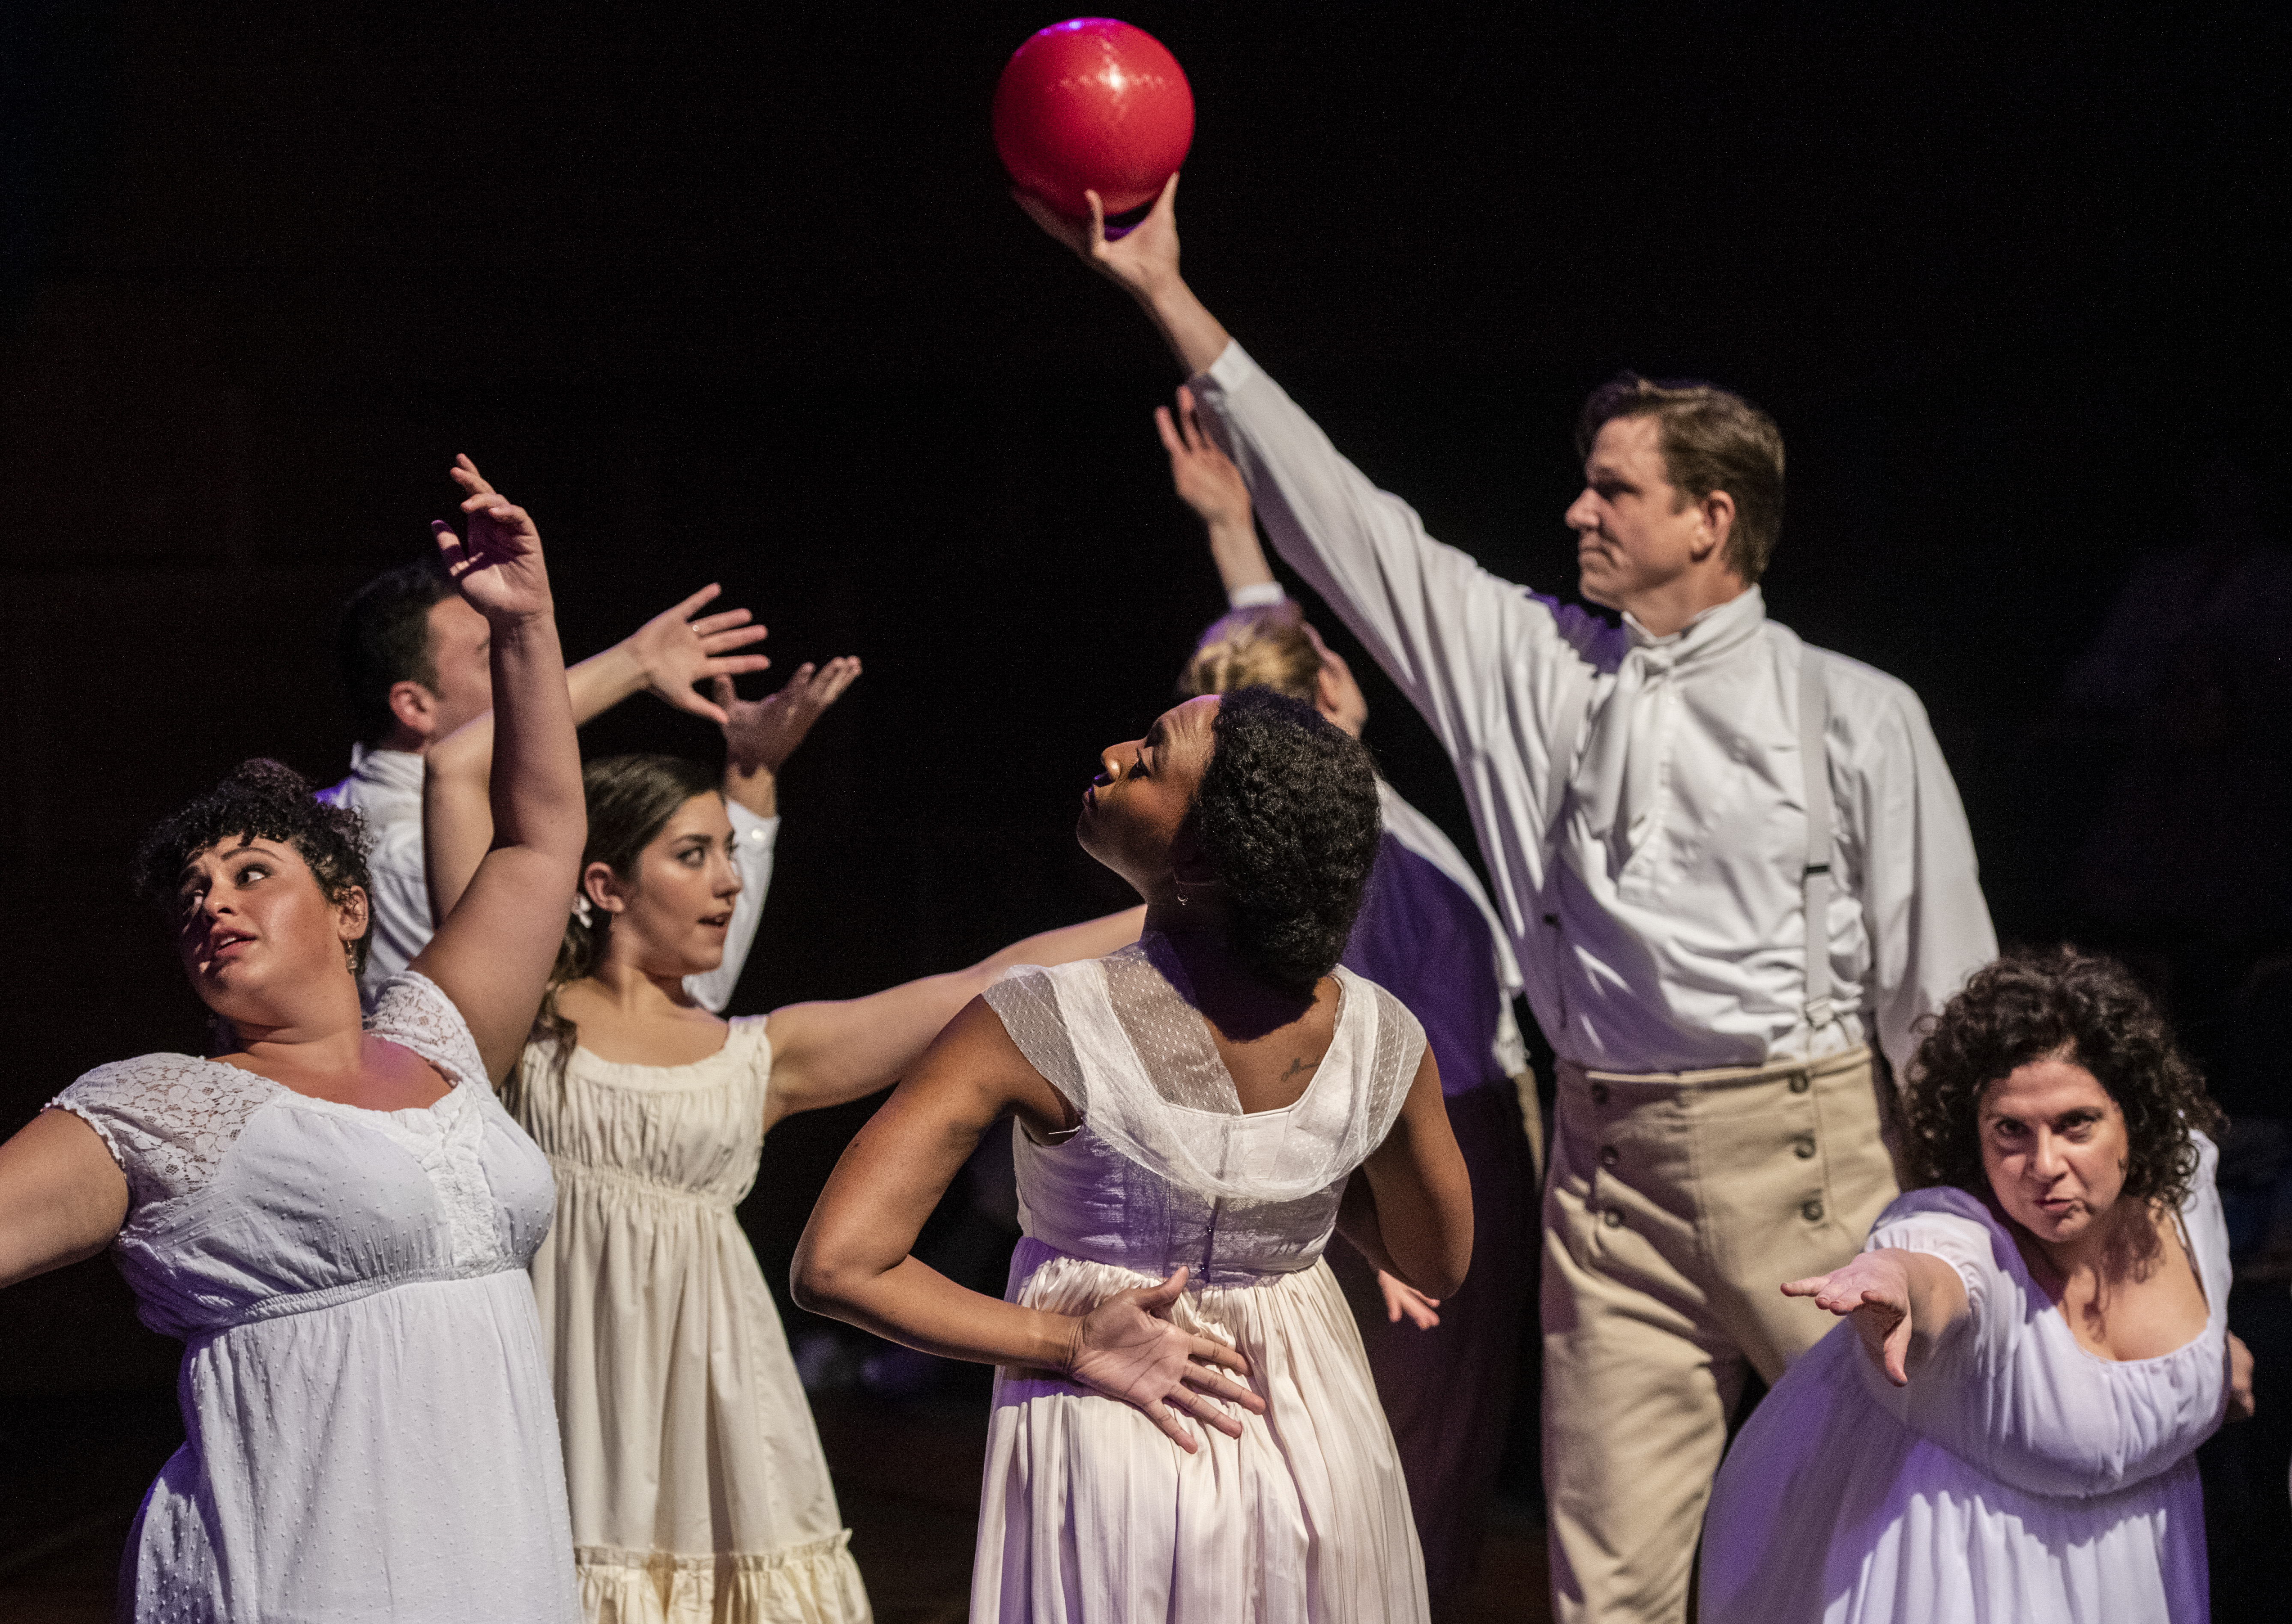 Members of the Bennet family frolic in their undies in this scene from ‘Pride and Prejudice.’ Daughter Mary (Andrew William Smith) proudly holds the red ball high, but when she dons a fine gown and veil to step into society, it will not go so well.